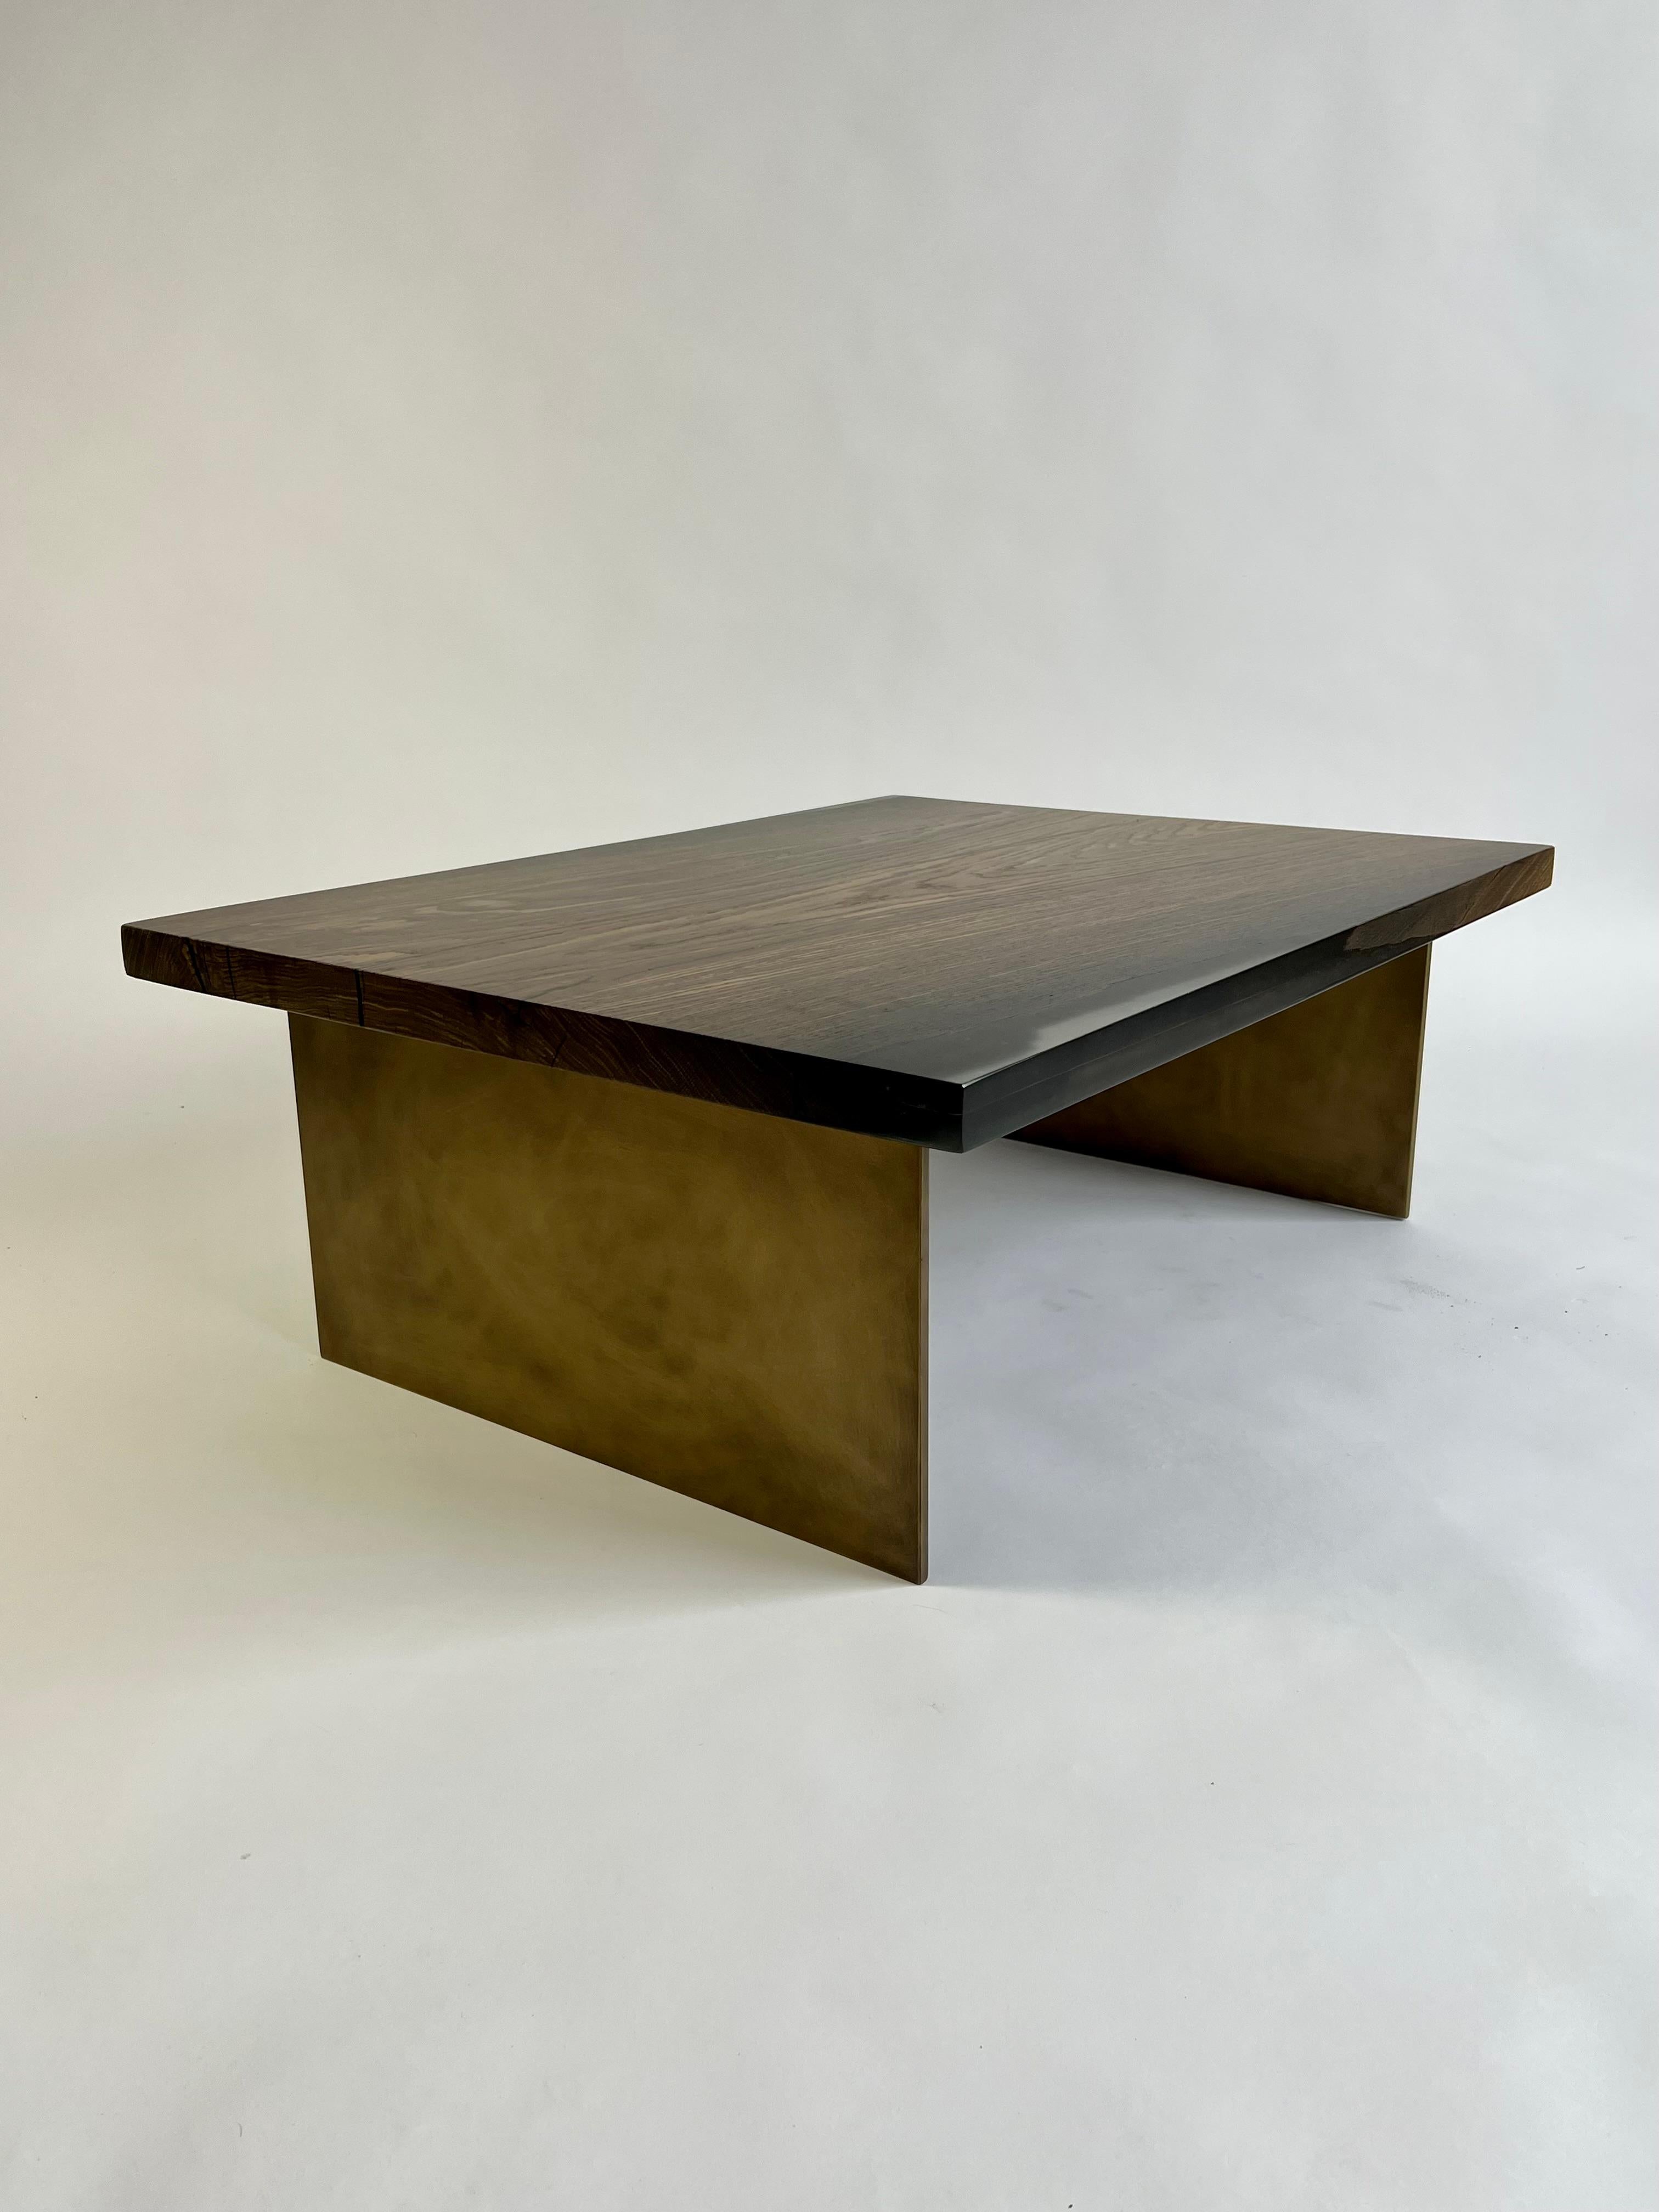 This coffee table is truly one-of-a-kind, made from ancient Bog Oak and strong epoxy resin. The wood itself is an impressive 7,000 years old and comes from Romania. It spent all those years buried underground, which kept it well-preserved by